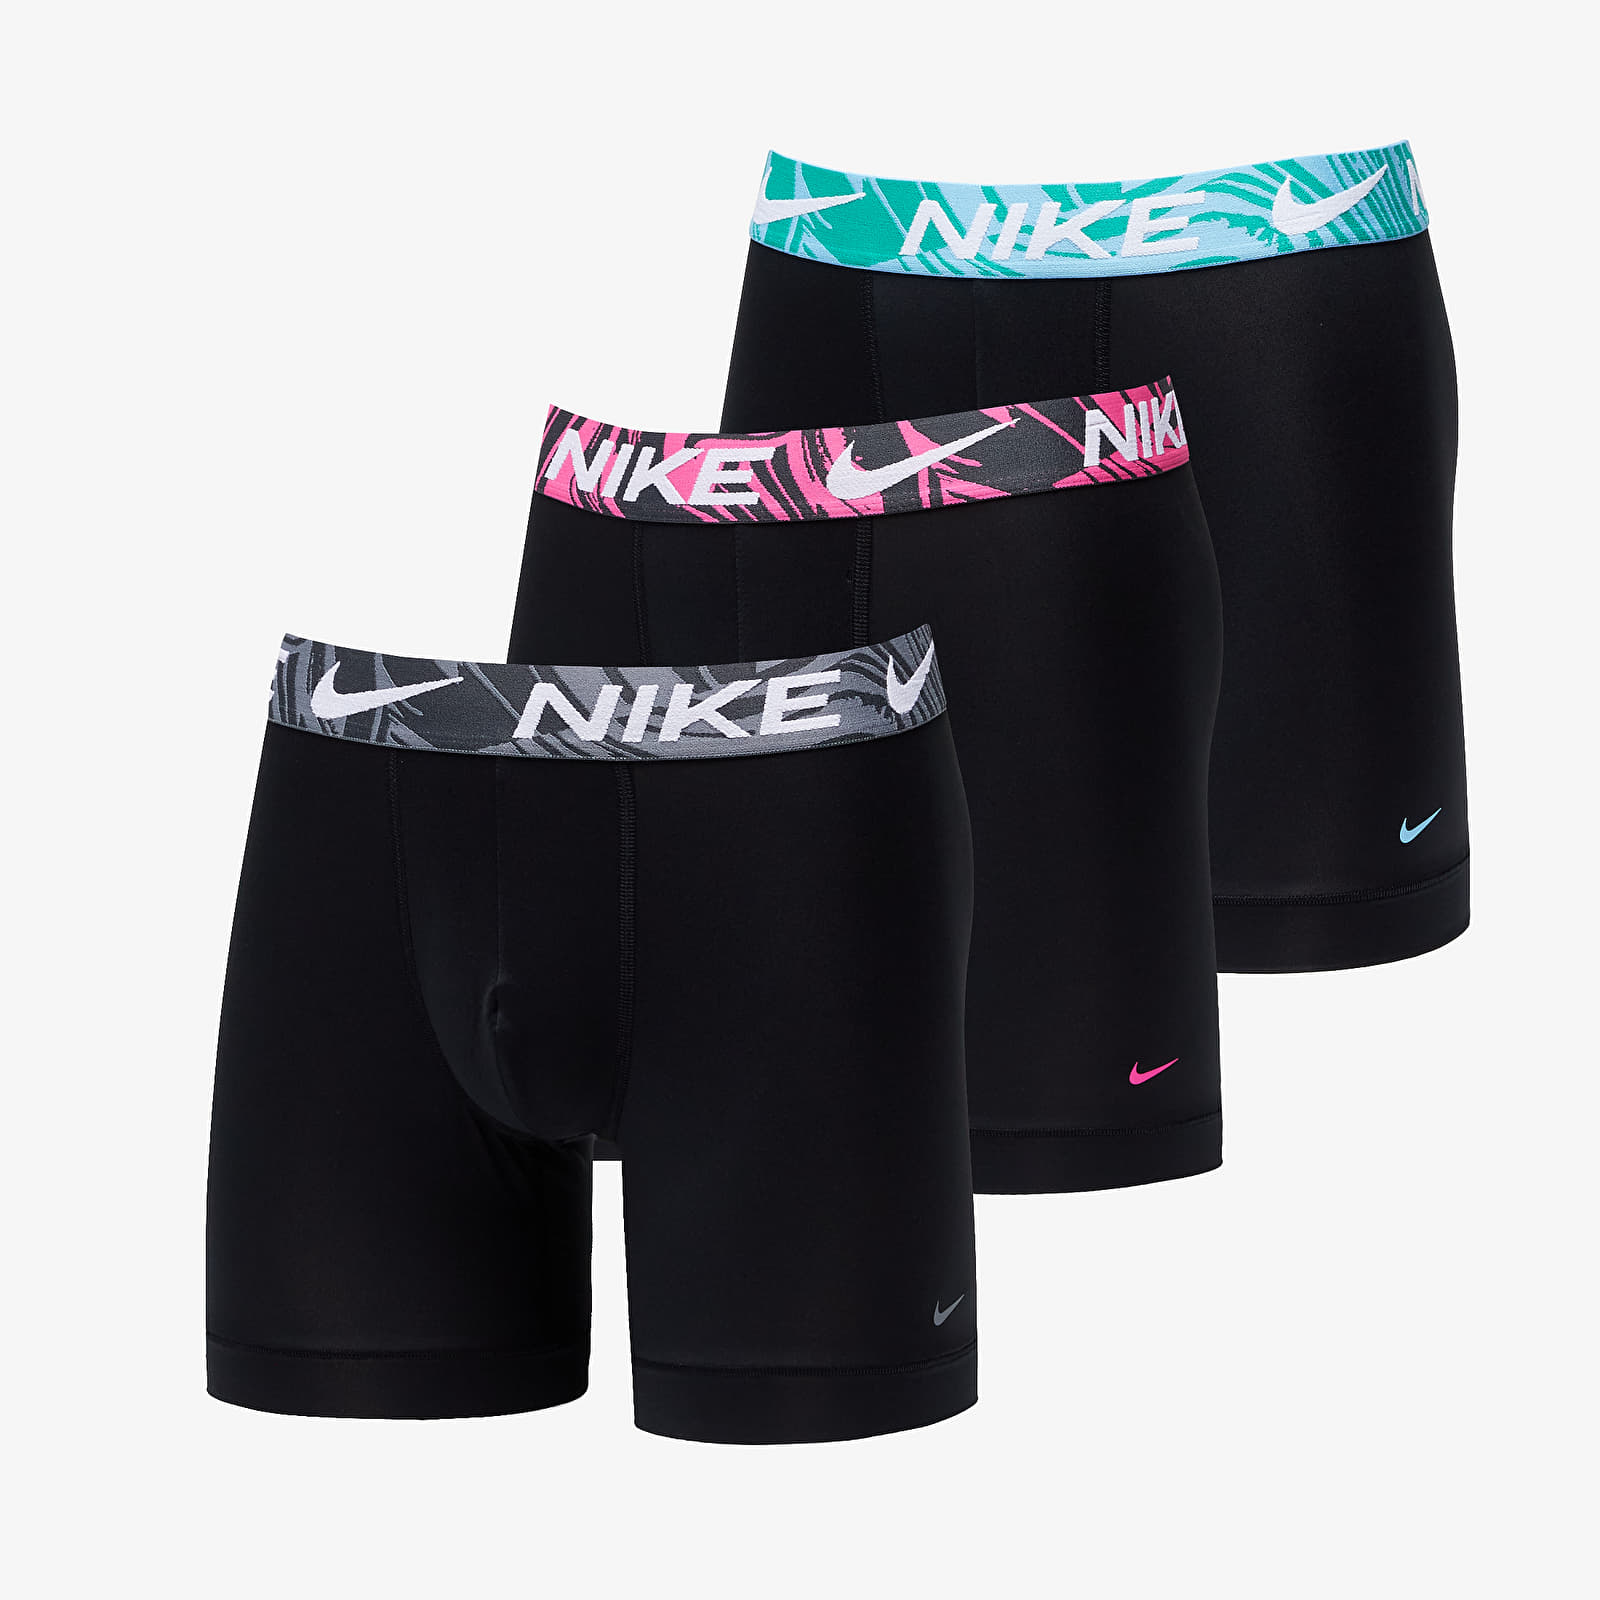 Boxer shorts Nike Boxer Brief 3-Pack Multicolor